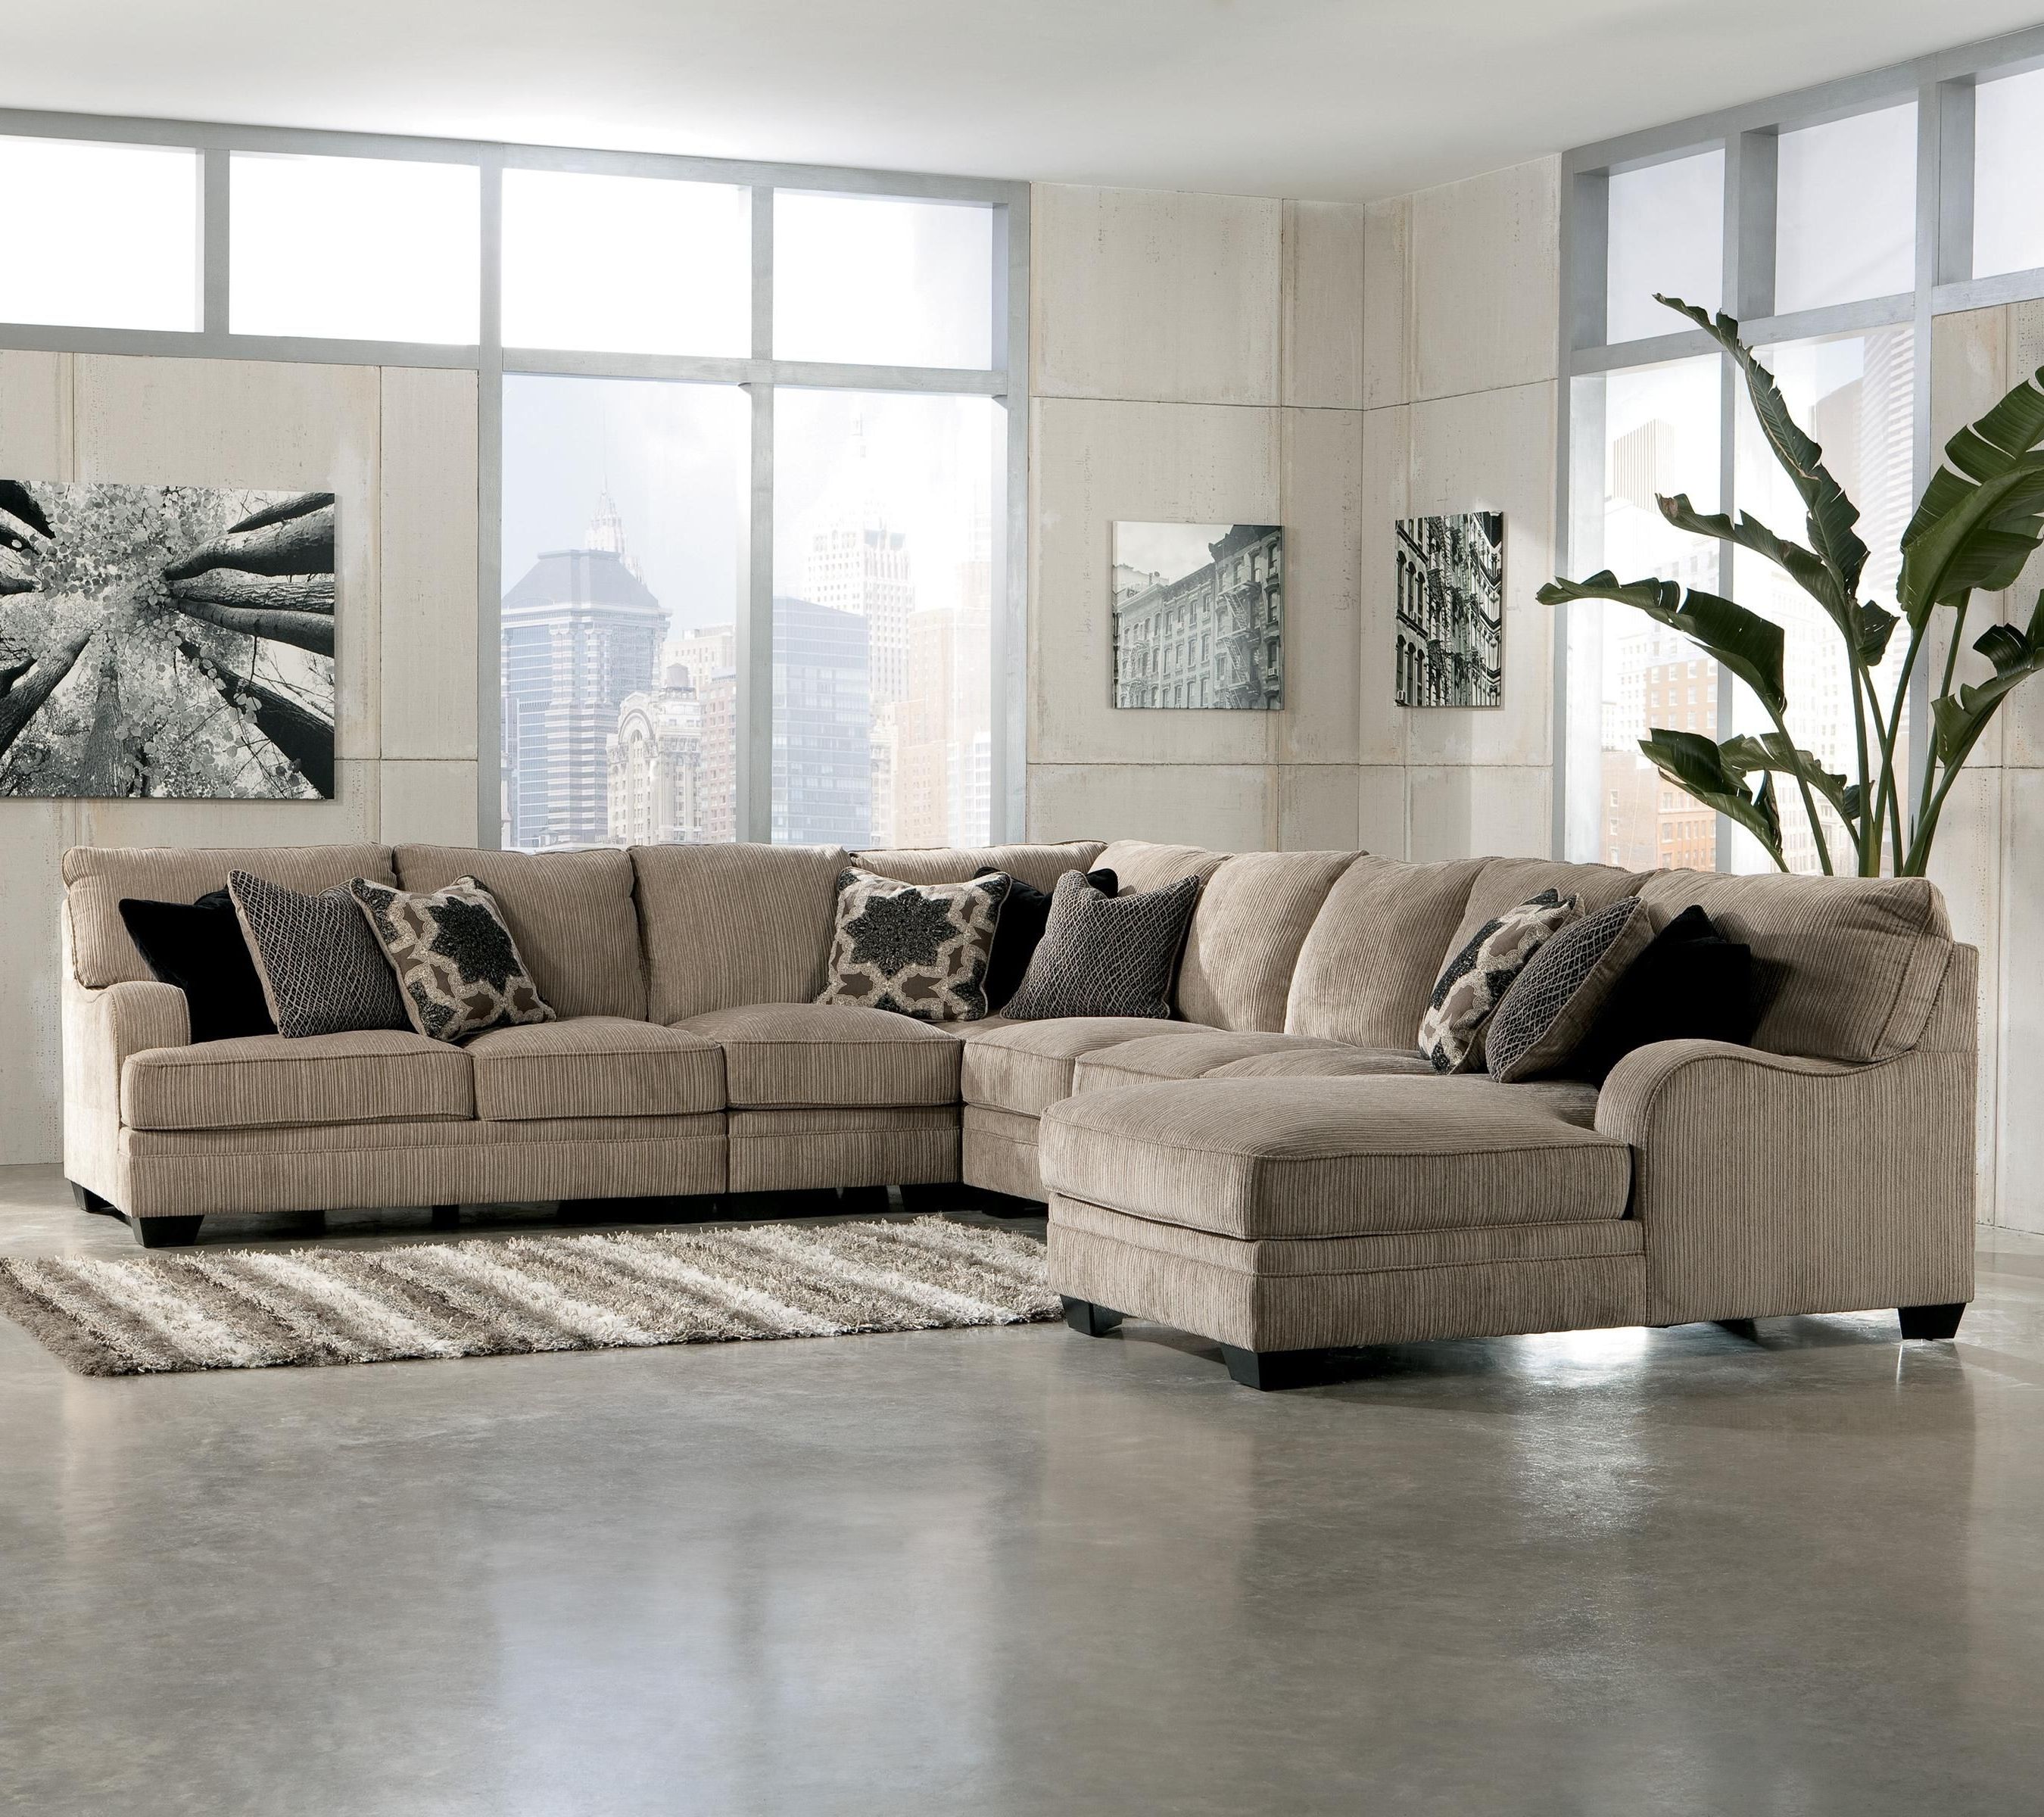 Living Room Sectional: Katisha 4 Piece Sectionalashley With Favorite Rochester Ny Sectional Sofas (View 1 of 20)